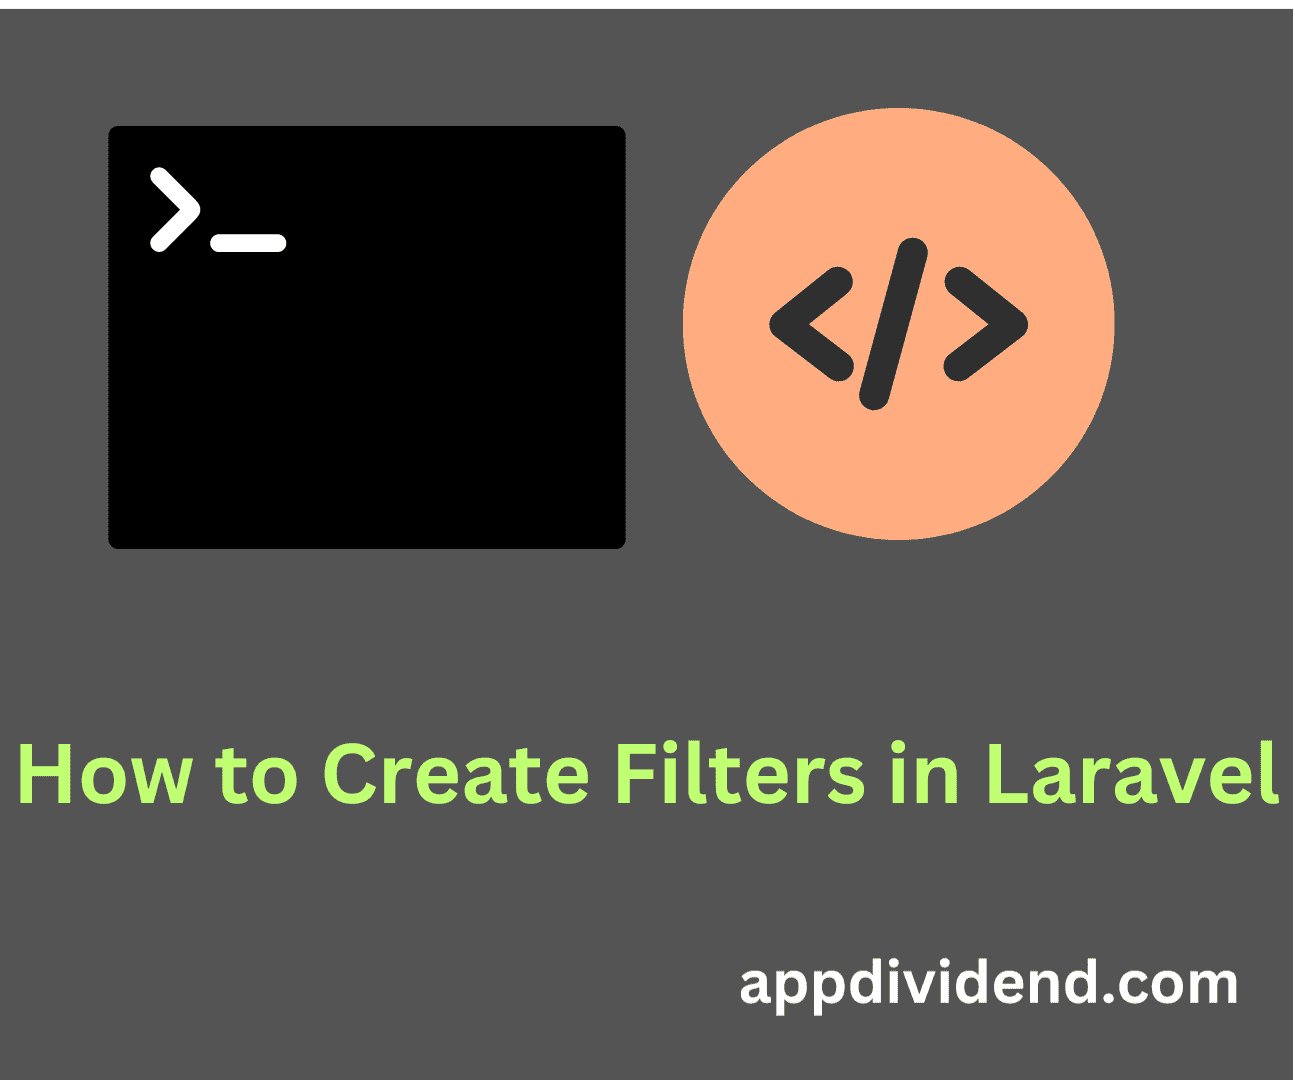 How to Create Filters in Laravel